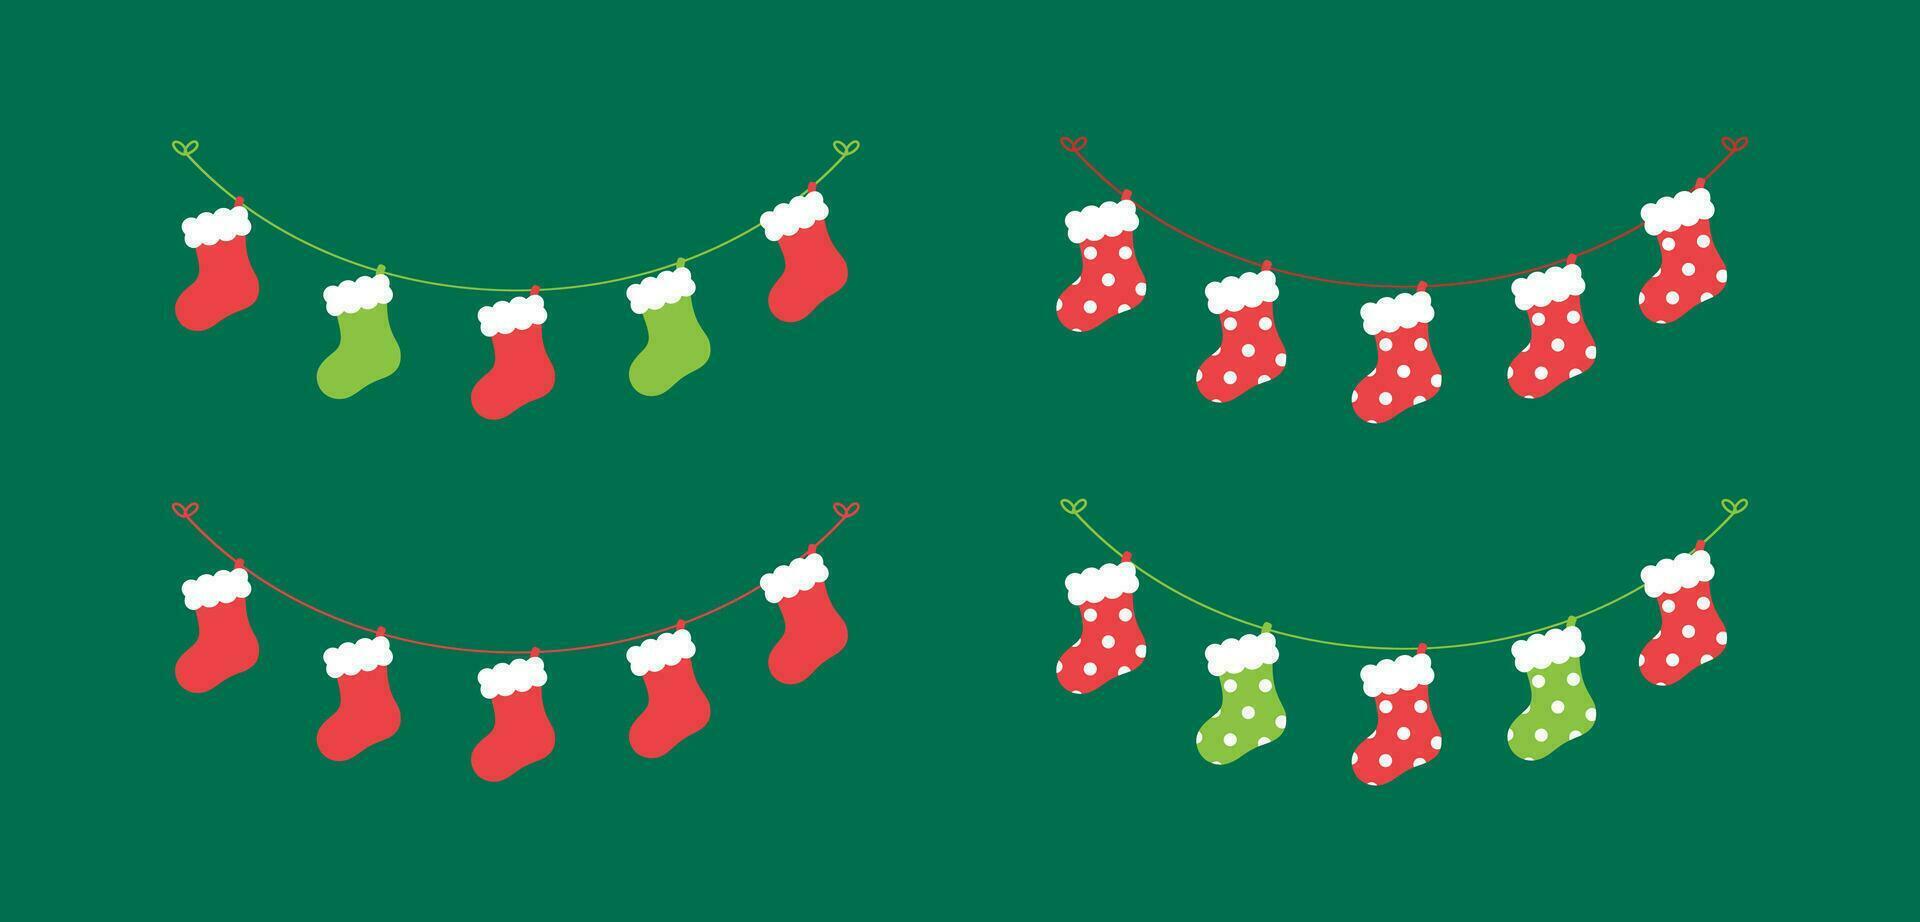 Set of Christmas and winter holiday decoration garland. Christmas decoration elements collection. Santa hat, stockings, mistletoe, ornaments, candy cane. Vector Illustration.